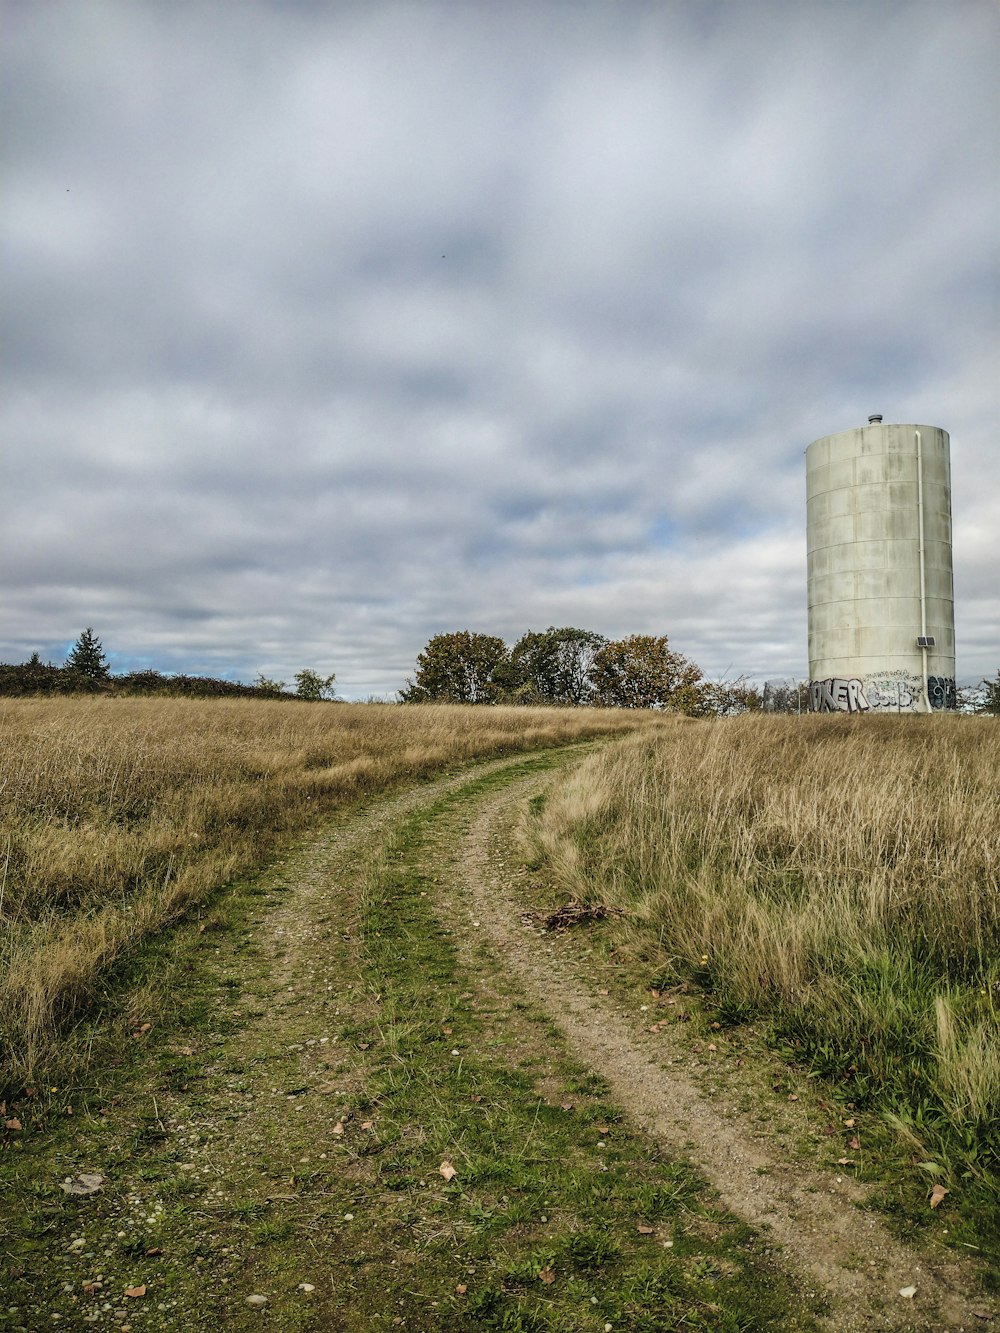 a dirt road in a field with a silo in the background